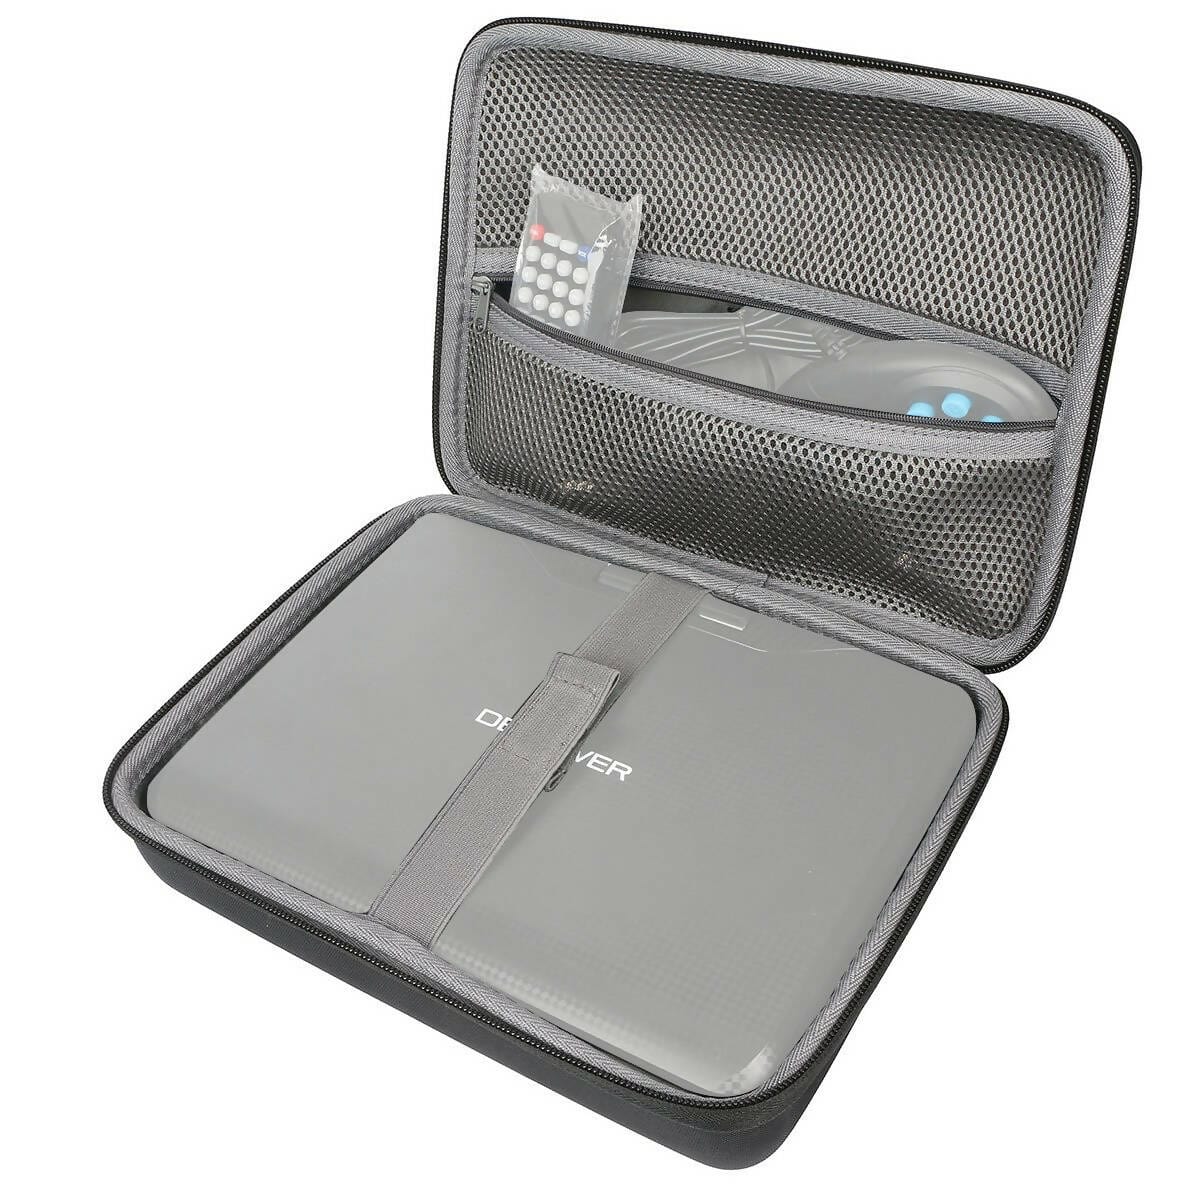 Provideolb DVD Cases Digicase Hard Carrying Case 9" for Portable DVD Player, TV, External USB - CP7074